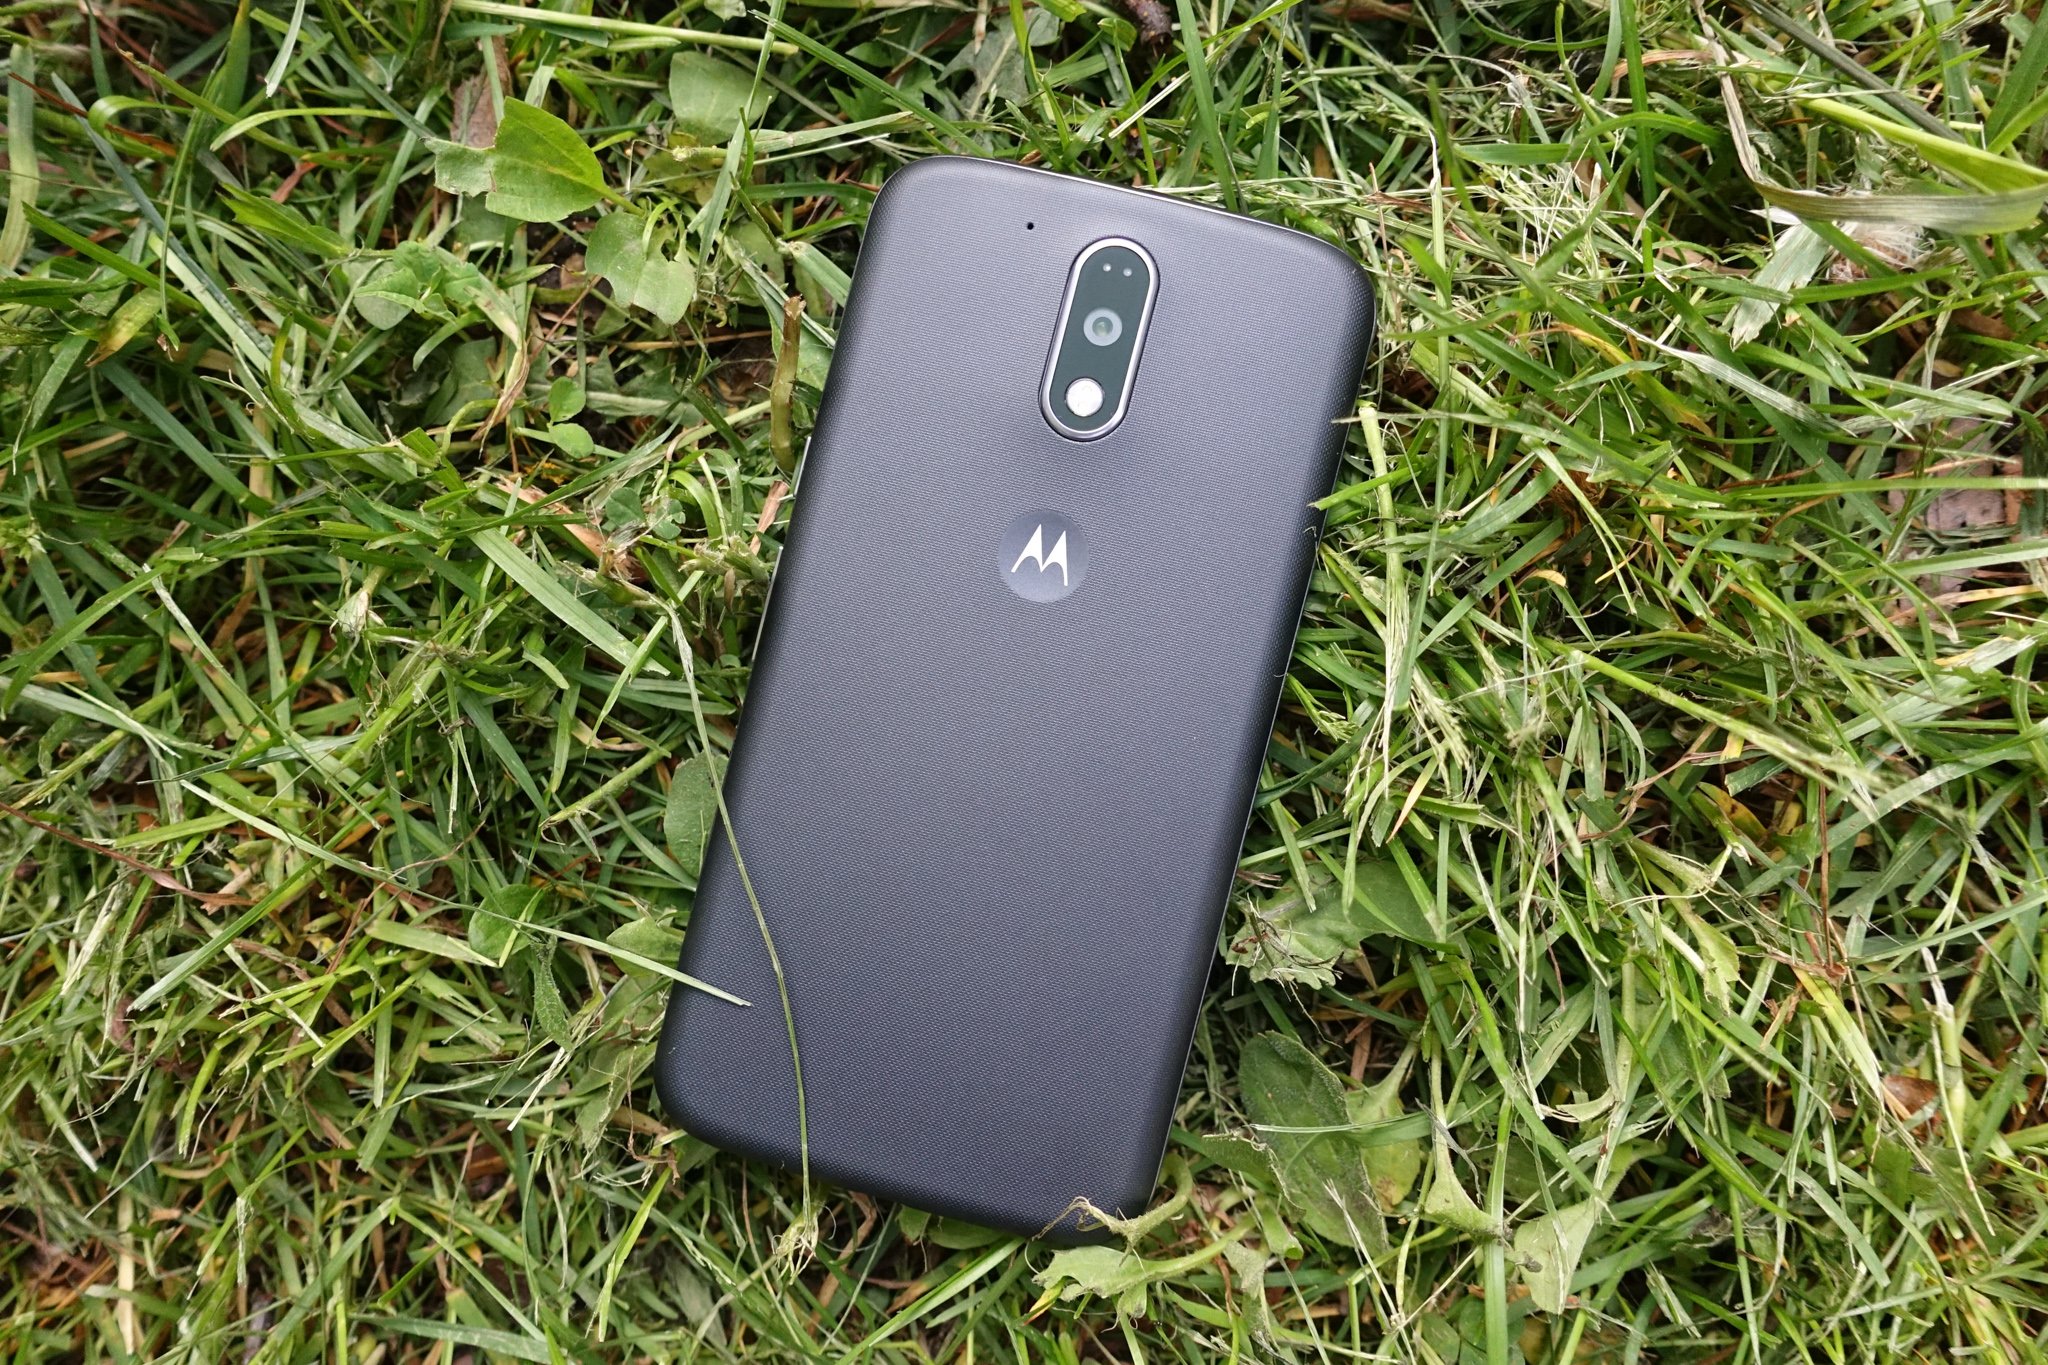 Moto G4 Plus A memorable upgrade | Android Central